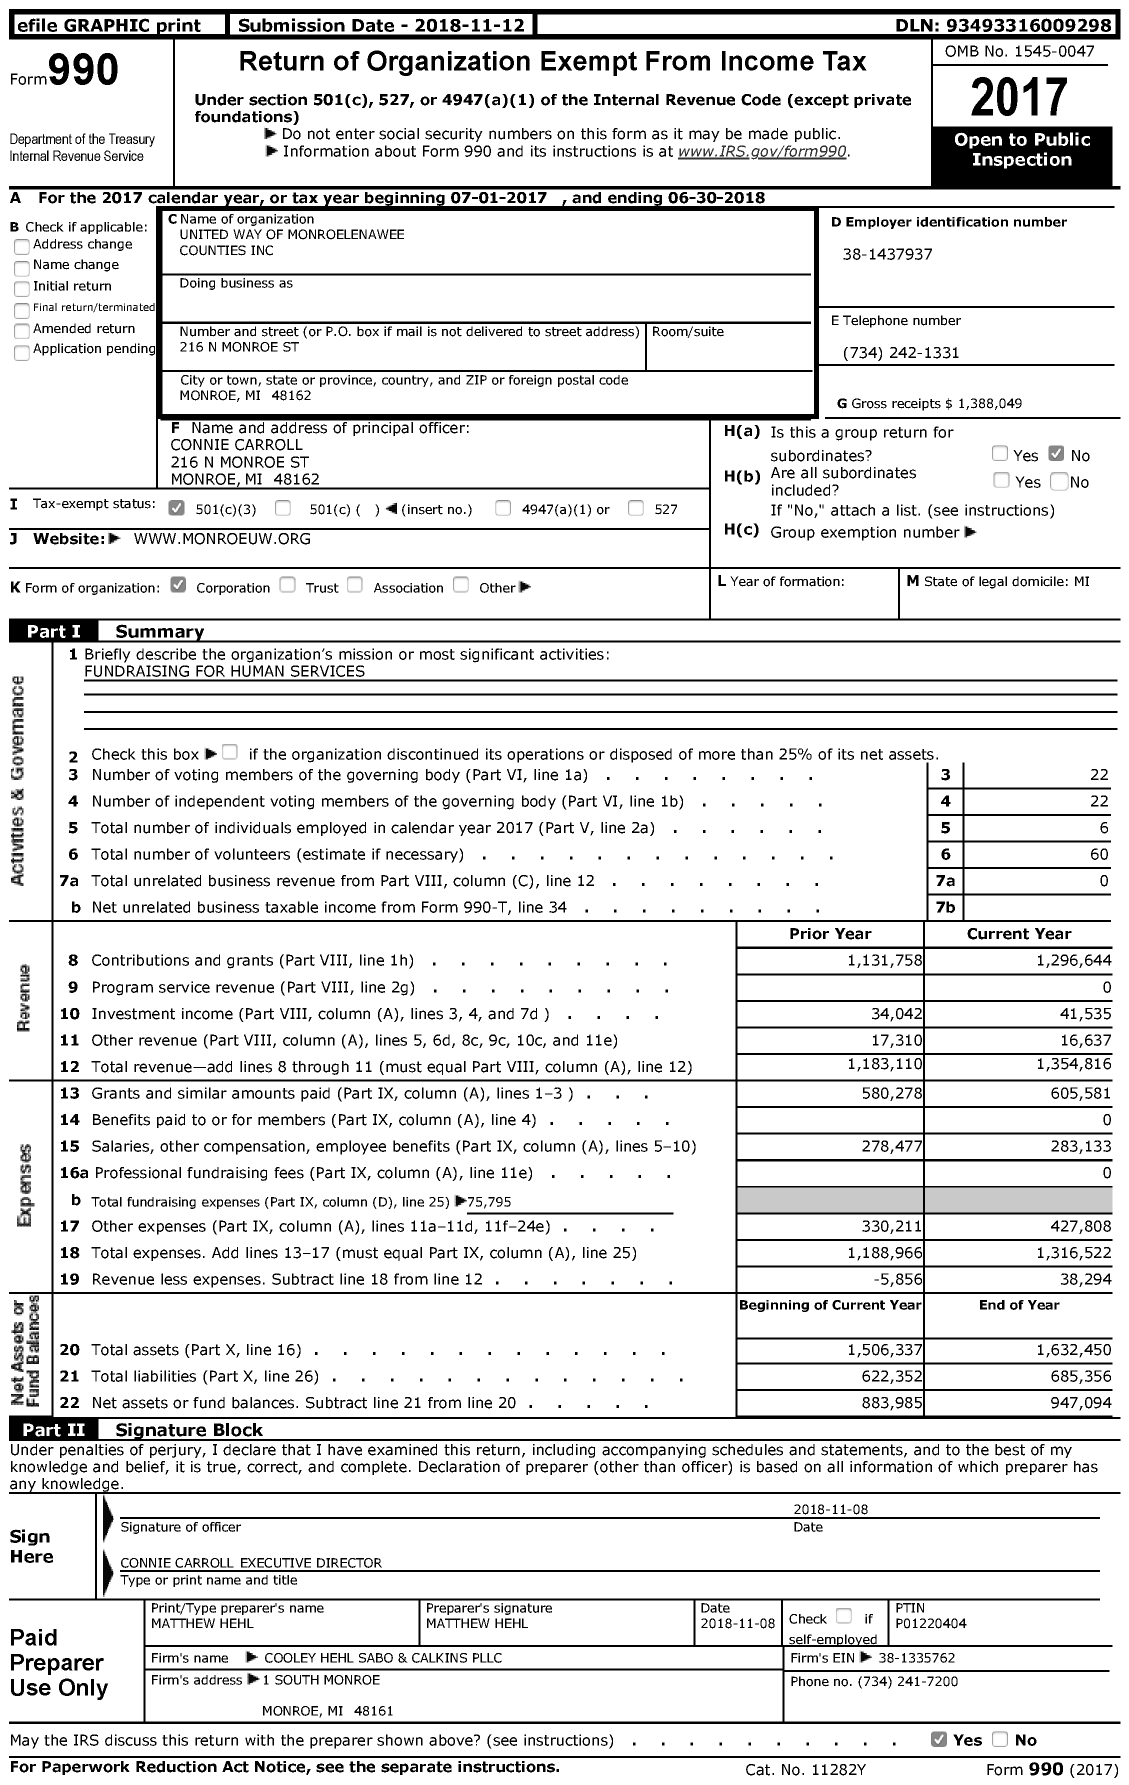 Image of first page of 2017 Form 990 for United Way of Monroelenawee Counties